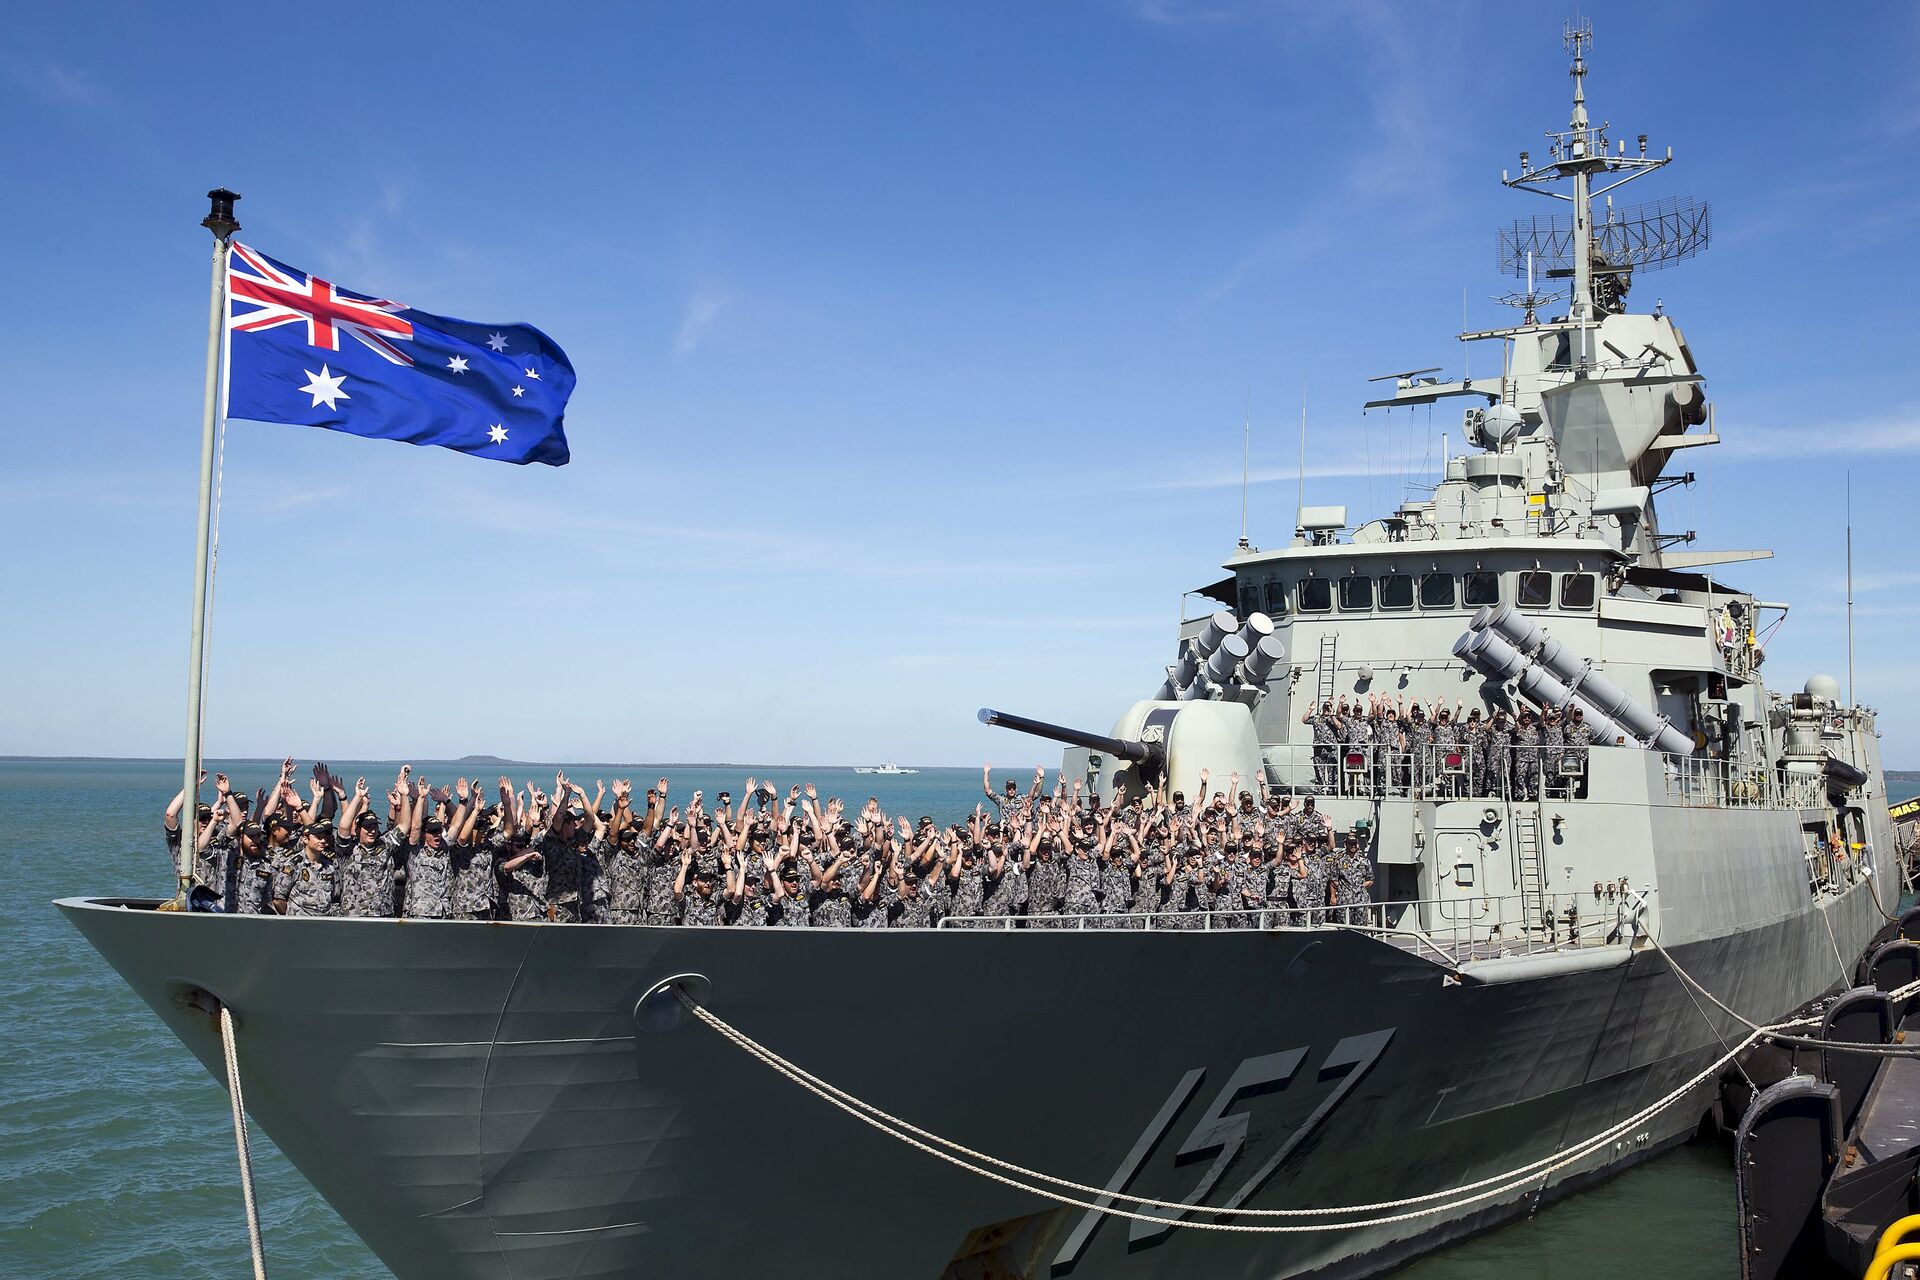 The crew of the Royal Australian Navy Anzac class frigate HMAS Perth cheer as they arrive at the Northern Australian city of Darwin in this picture taken on July 3, 2015 - Sputnik International, 1920, 19.09.2021